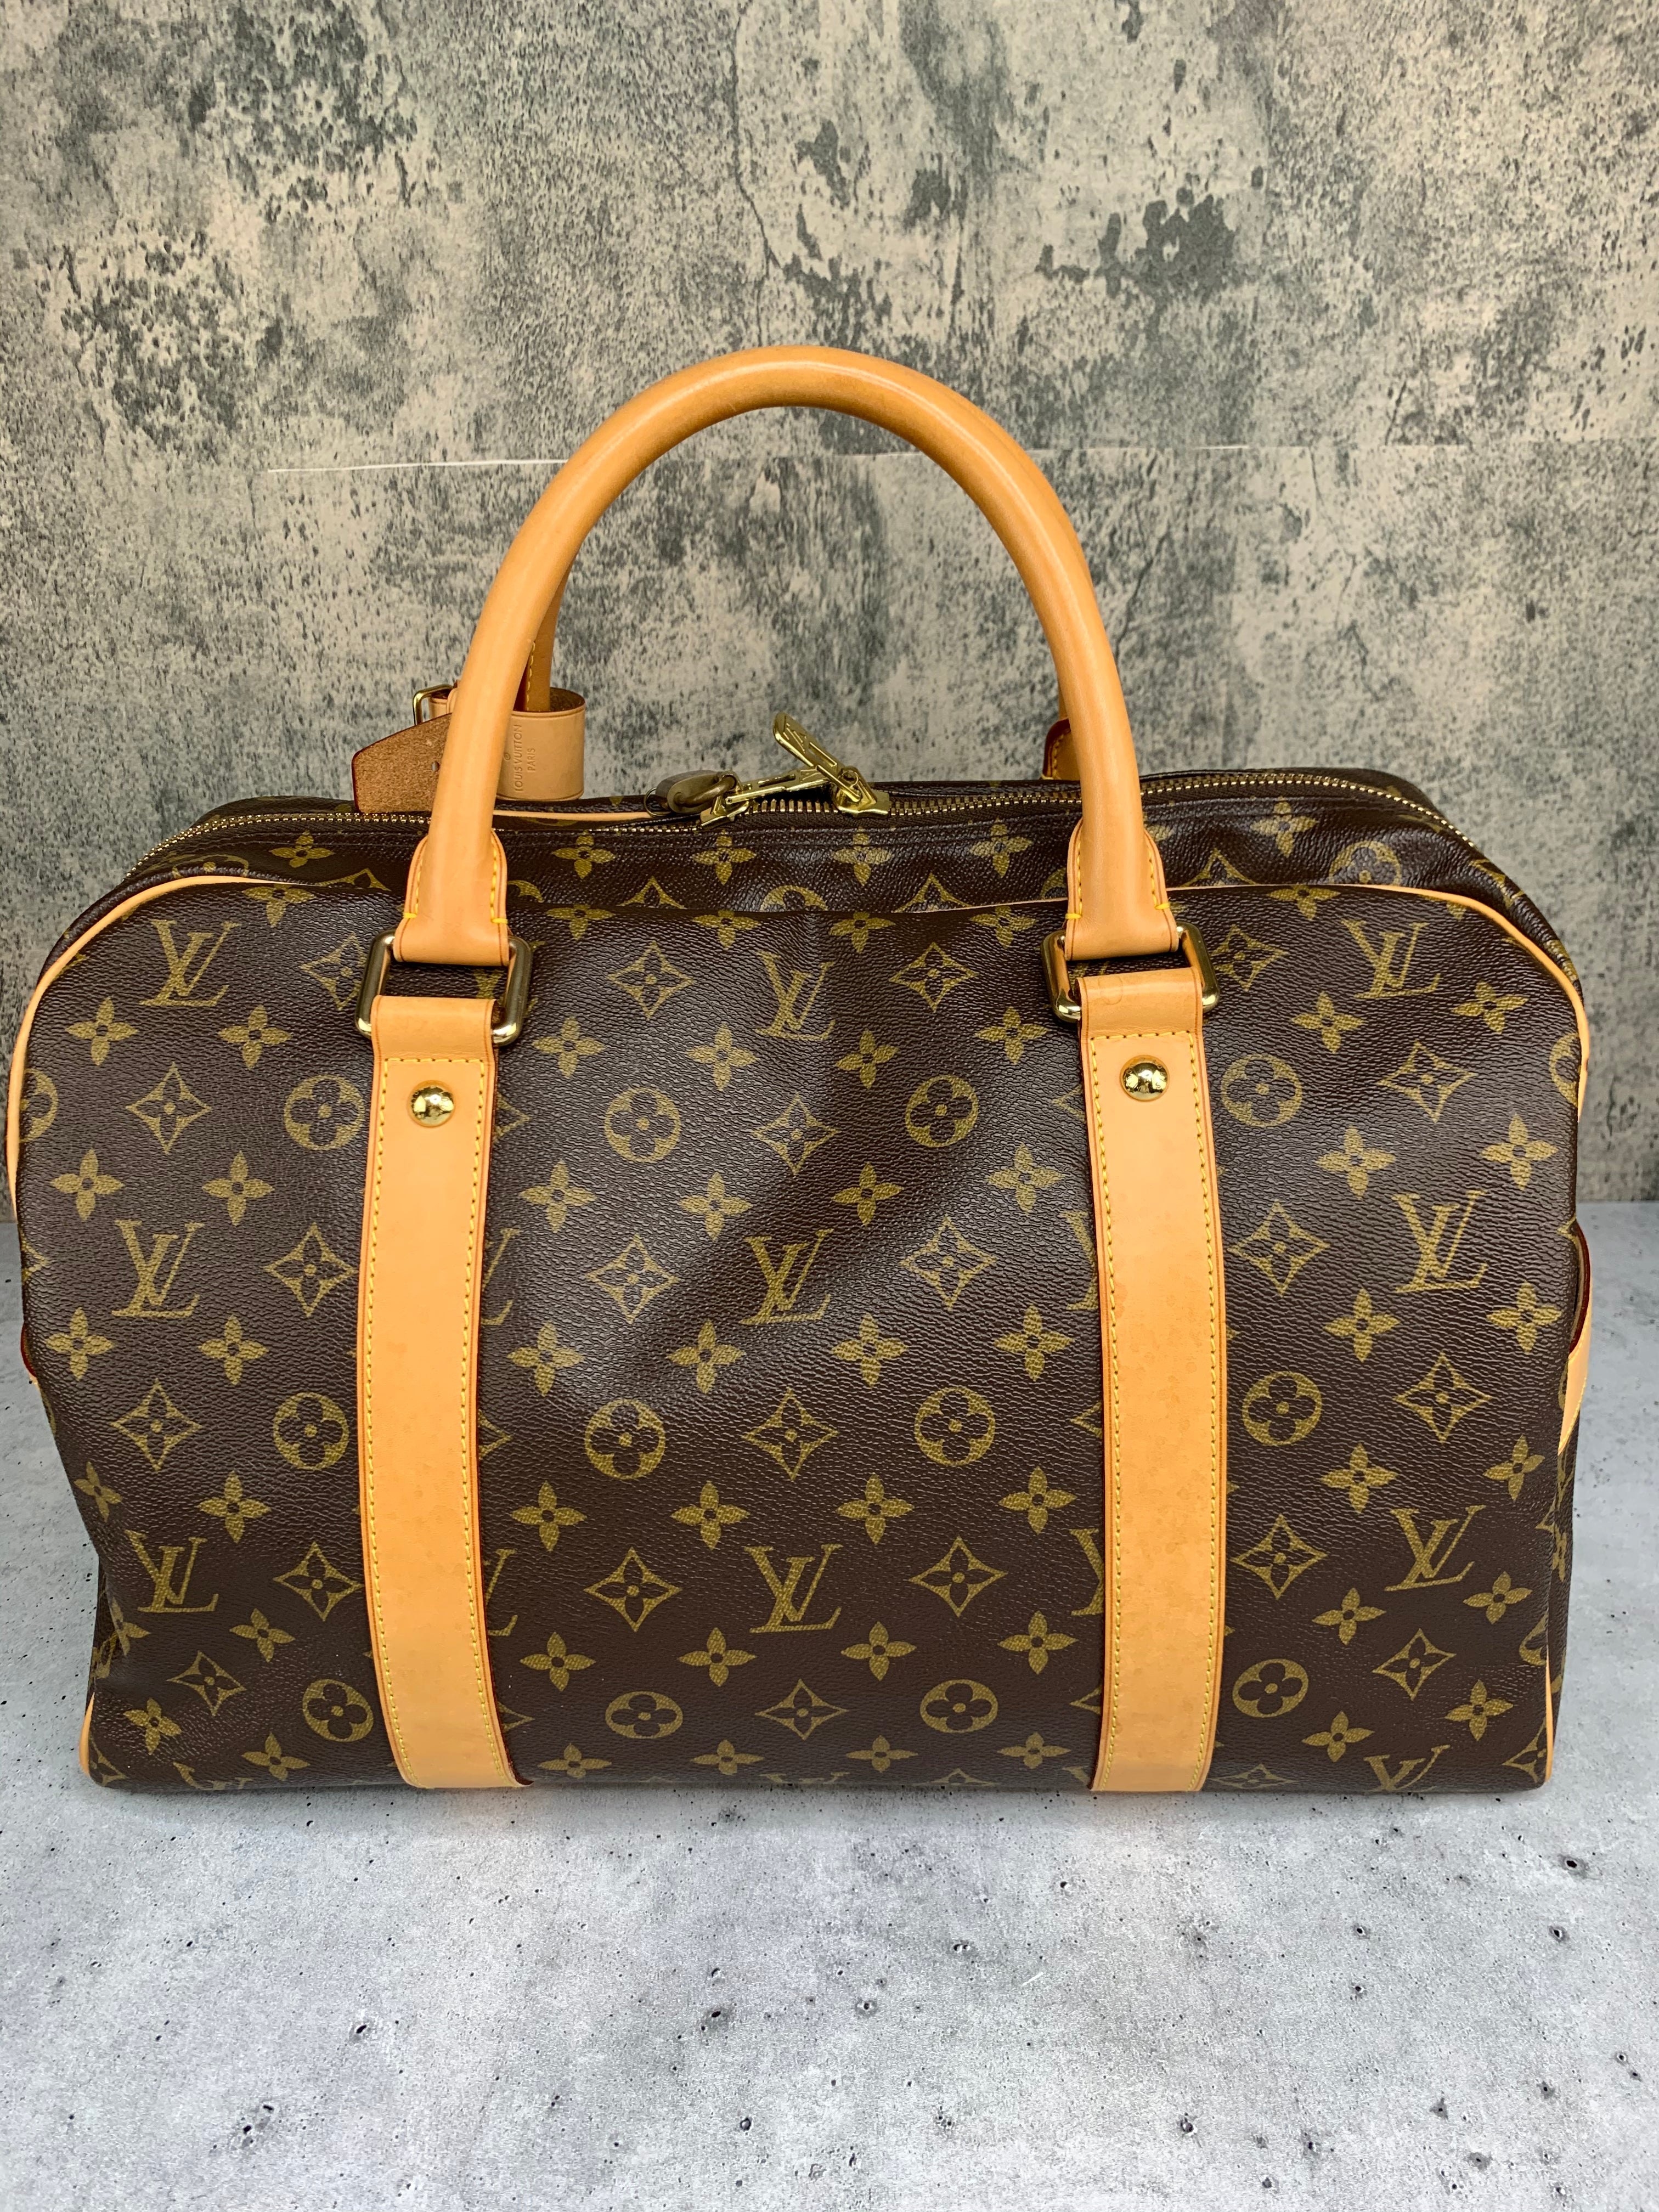 OLD🤑 LV 👜 Carryall Bag  Bags, Carry all bag, Carryall